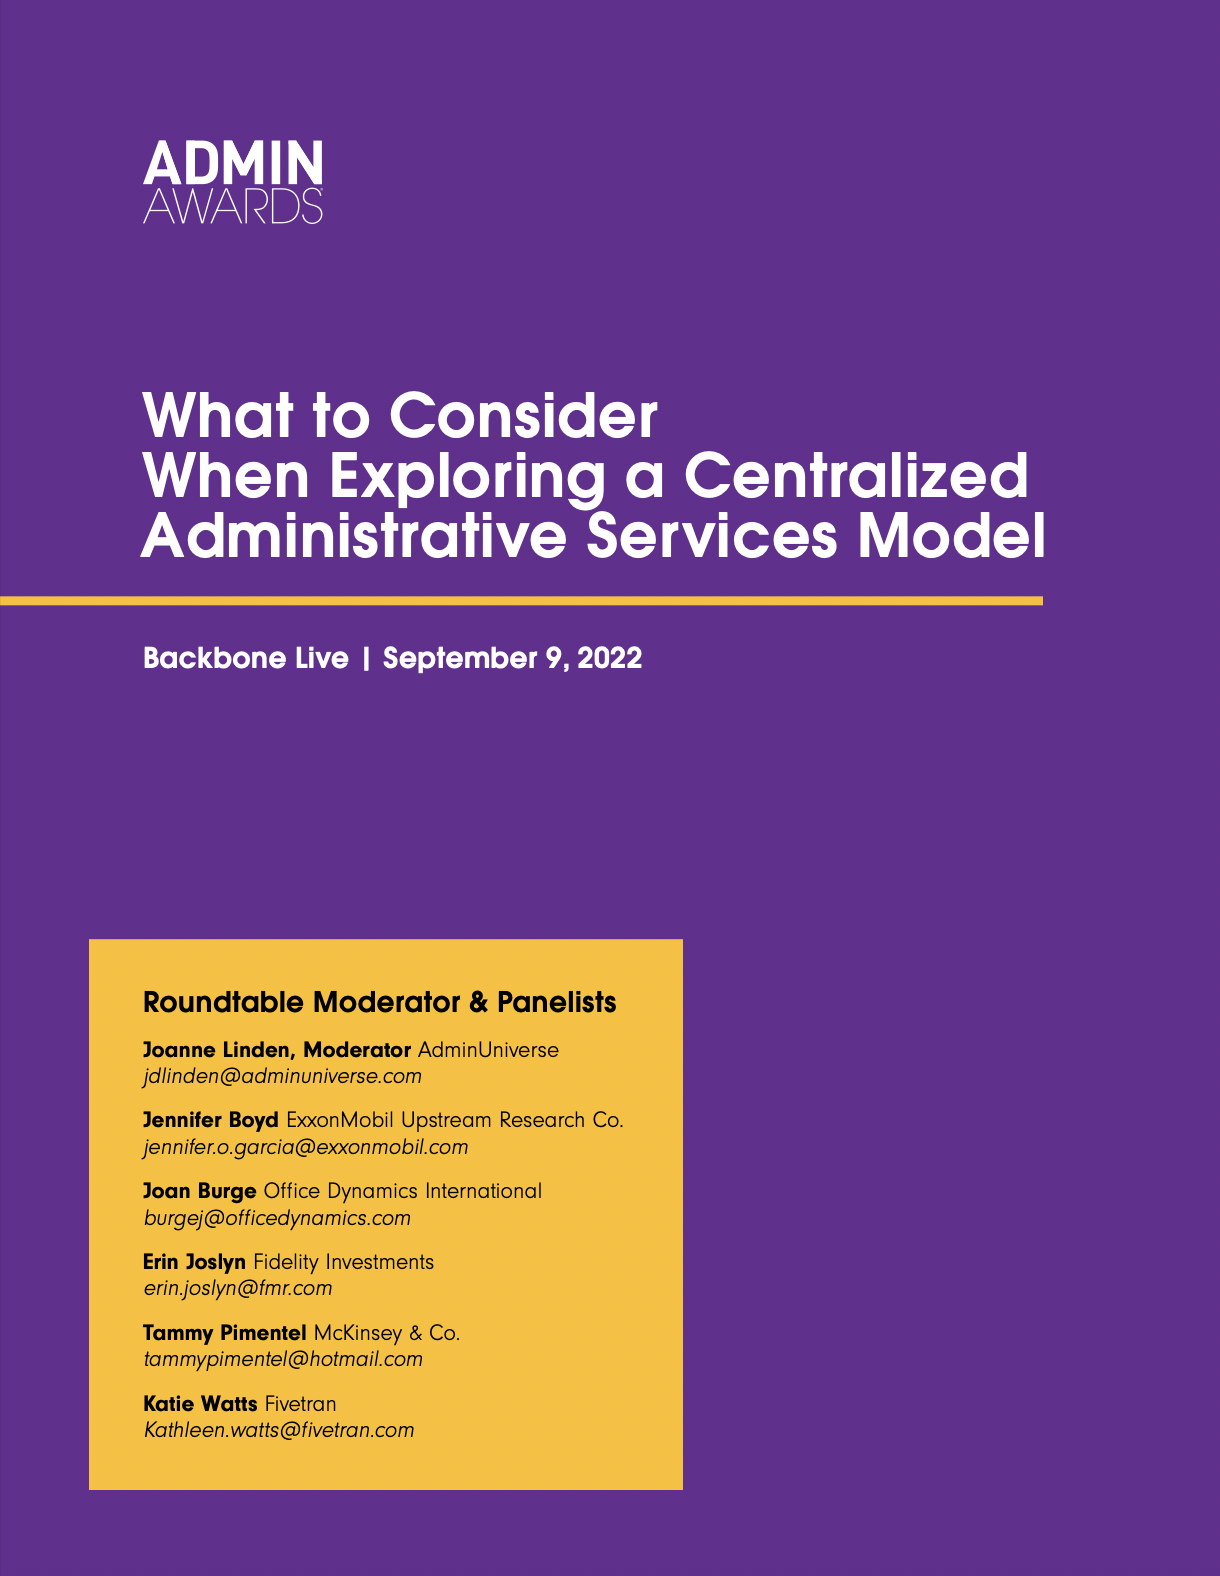 Whitepaper on What to Consider When Exploring a Centralized Administrative Services Model